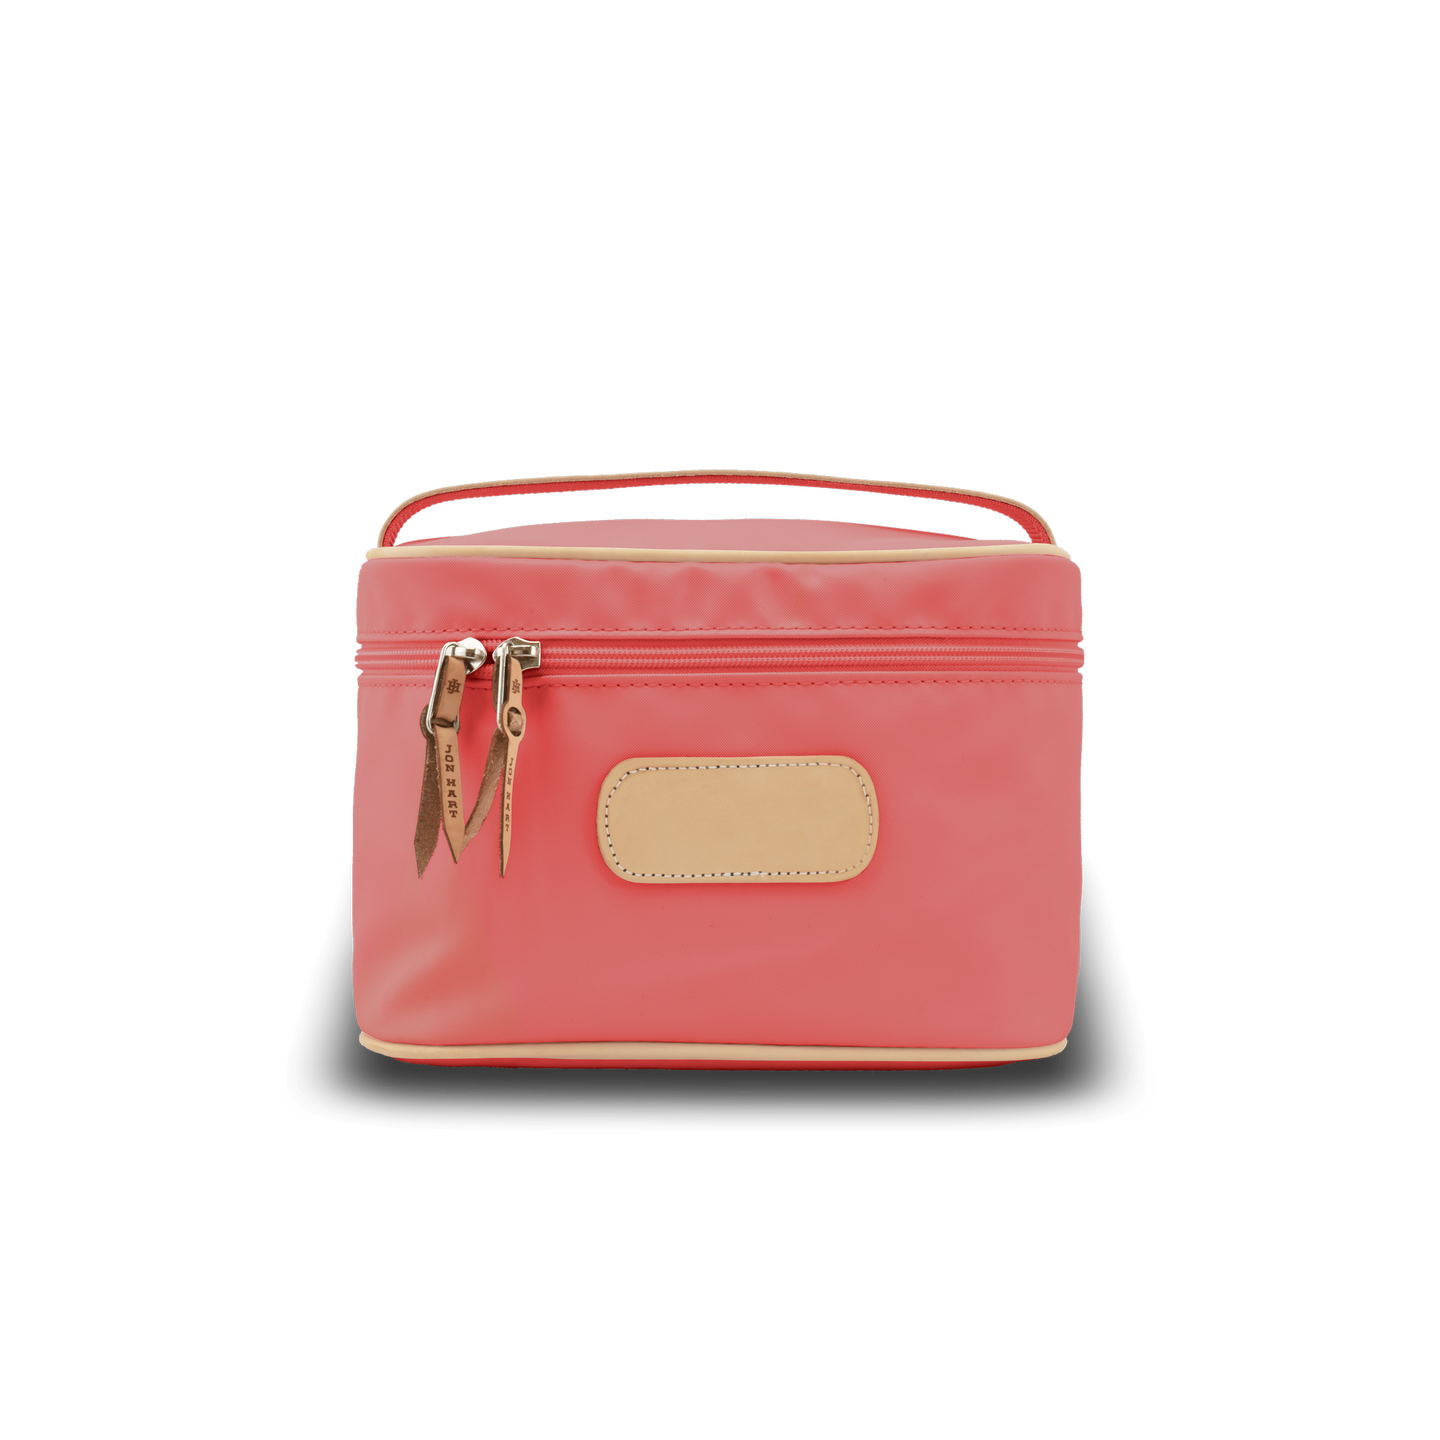 Makeup Case - Coral Coated Canvas Front Angle in Color 'Coral Coated Canvas'